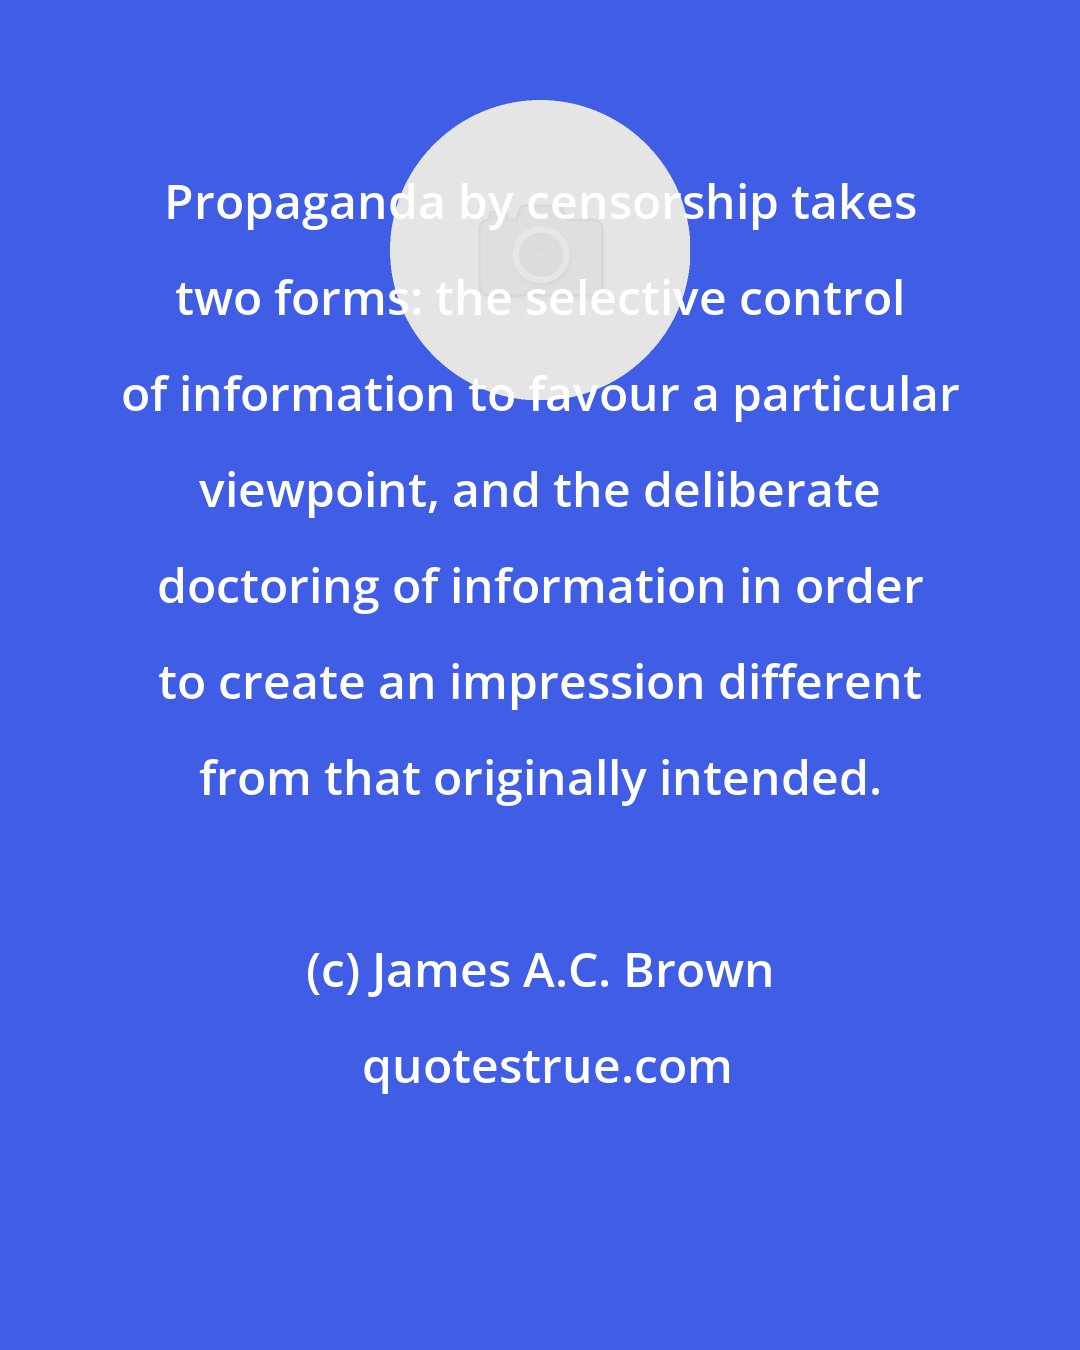 James A.C. Brown: Propaganda by censorship takes two forms: the selective control of information to favour a particular viewpoint, and the deliberate doctoring of information in order to create an impression different from that originally intended.